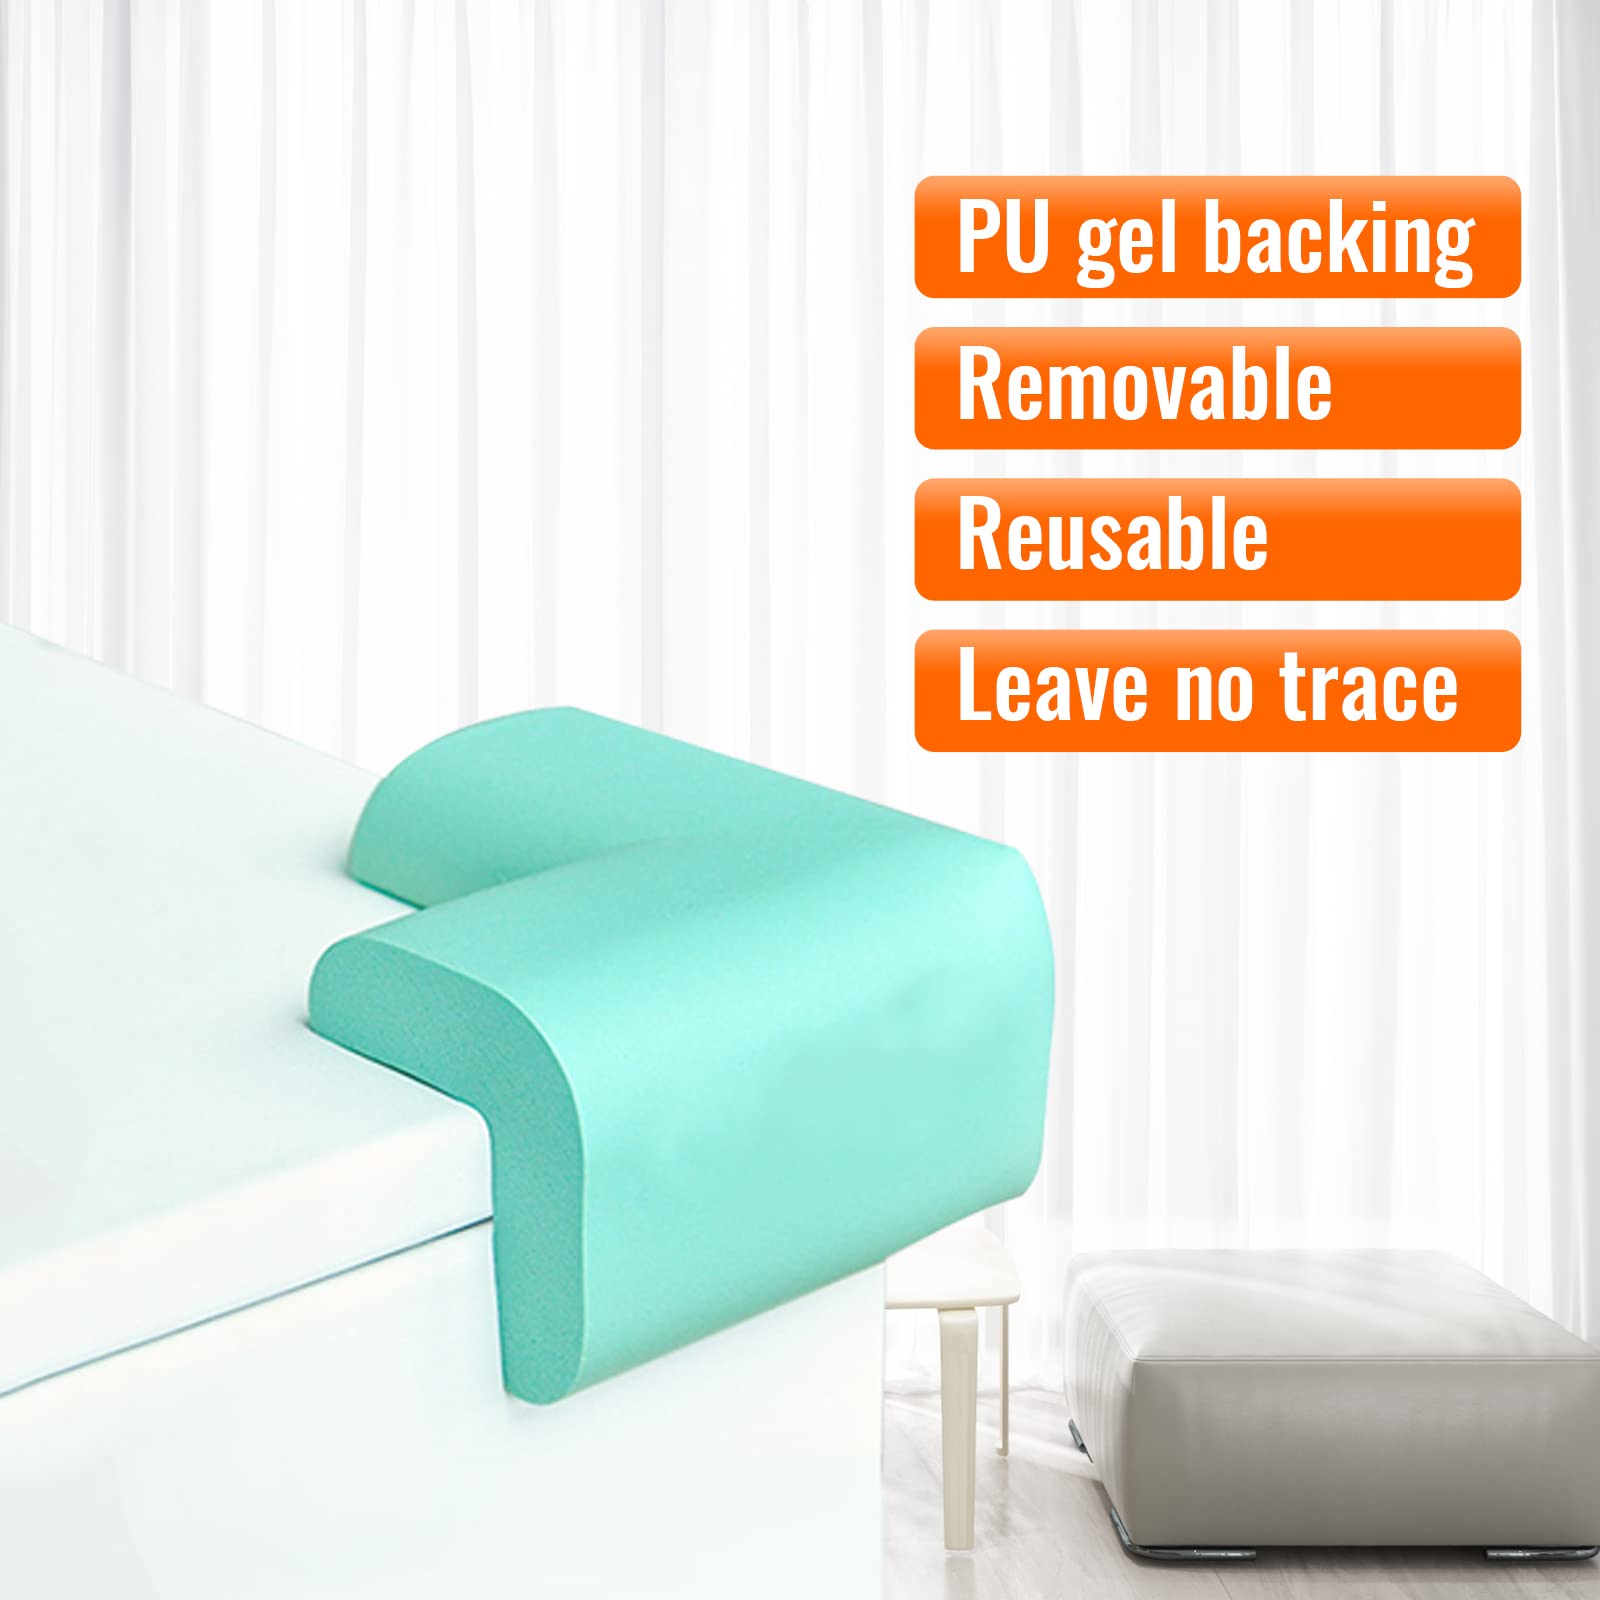 ZC GEL Corner Protectors for Furniture(16 Pack)- Baby Proofing Corner Guards with Strong Stickiness,Removable and Reusable Pre-Taped Bumper Guards for Furniture, Sharp Corner Cushions